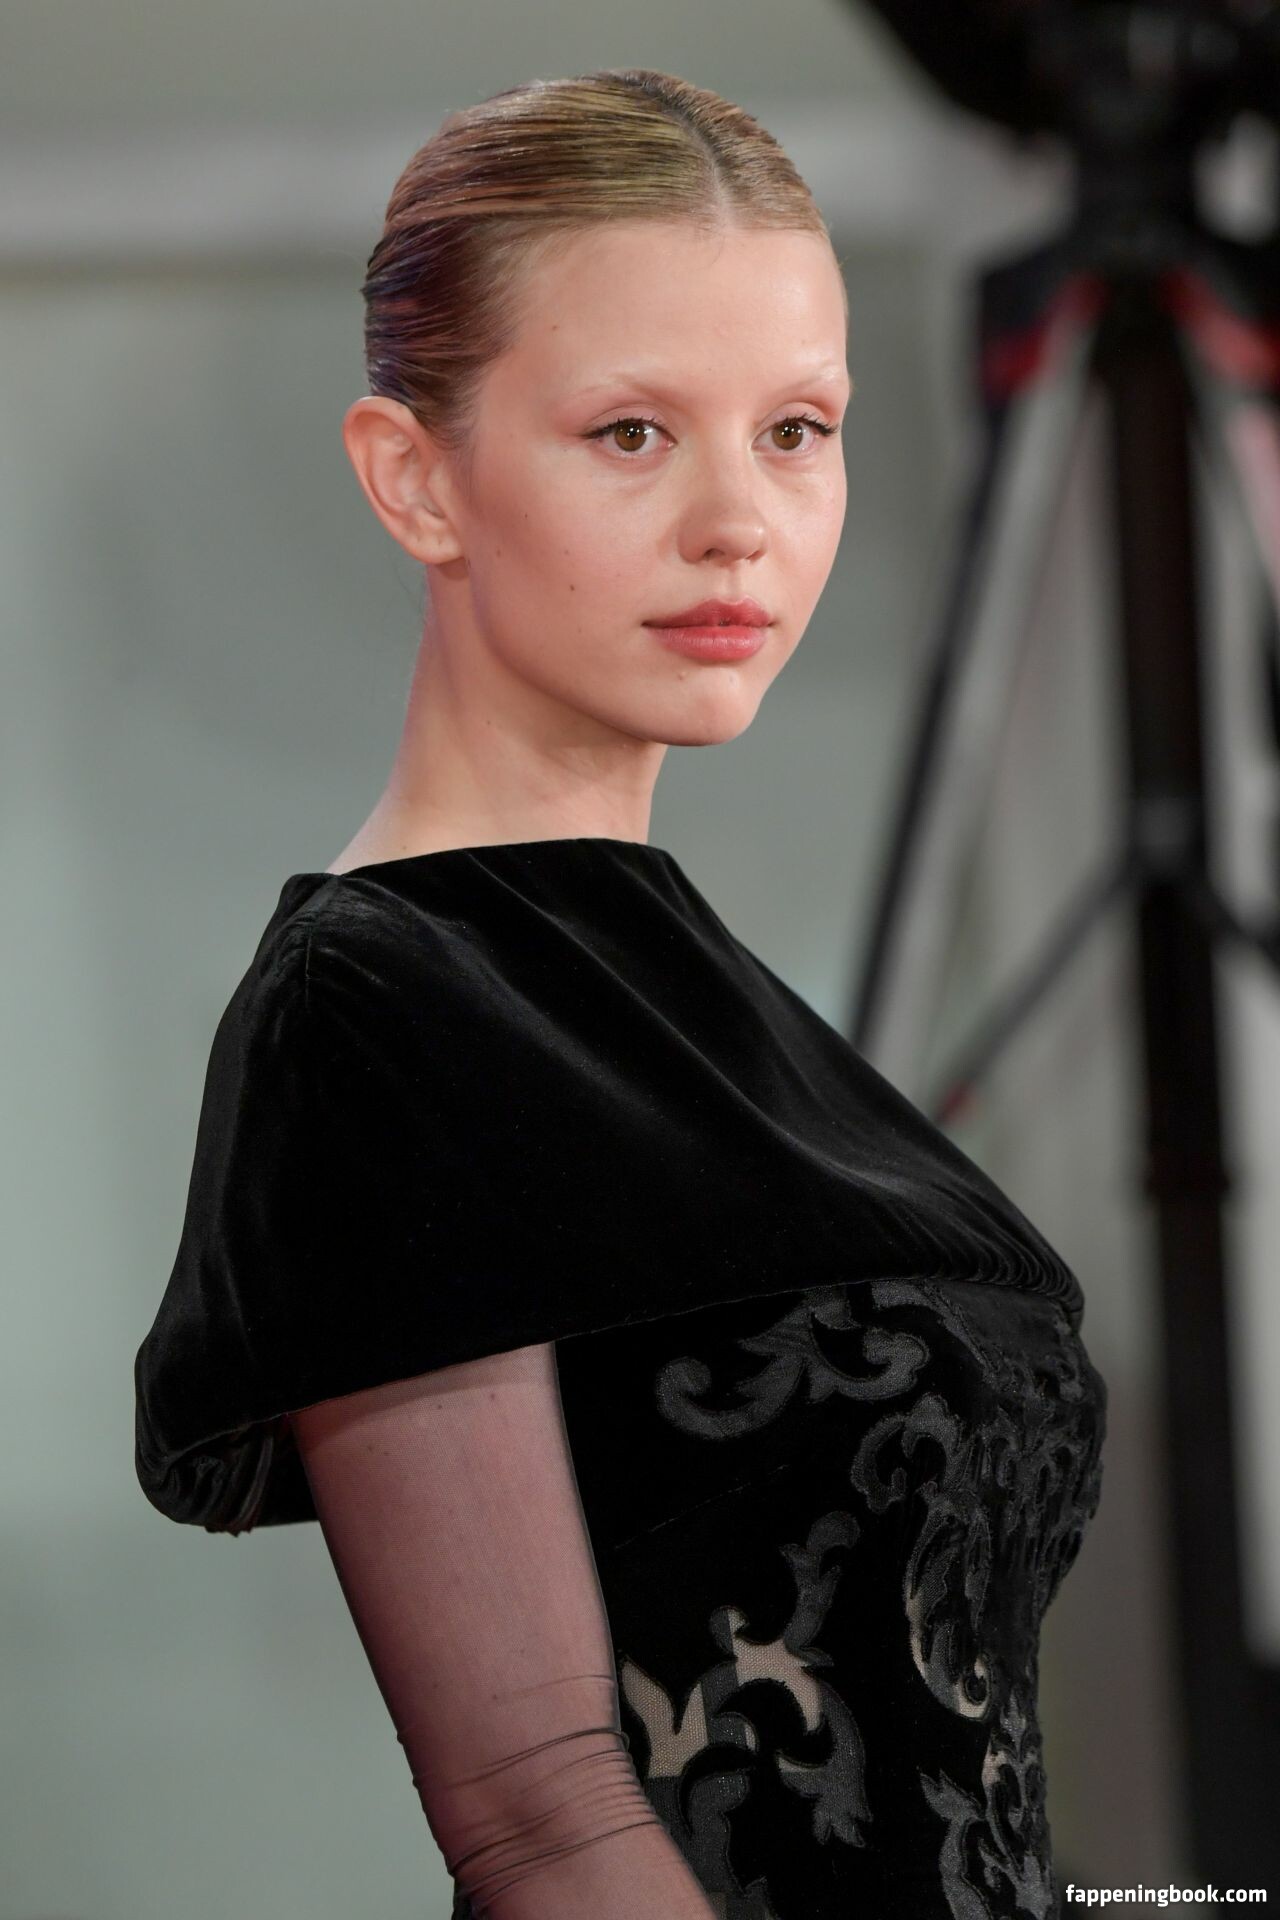 Mia Goth Nude OnlyFans Leaks